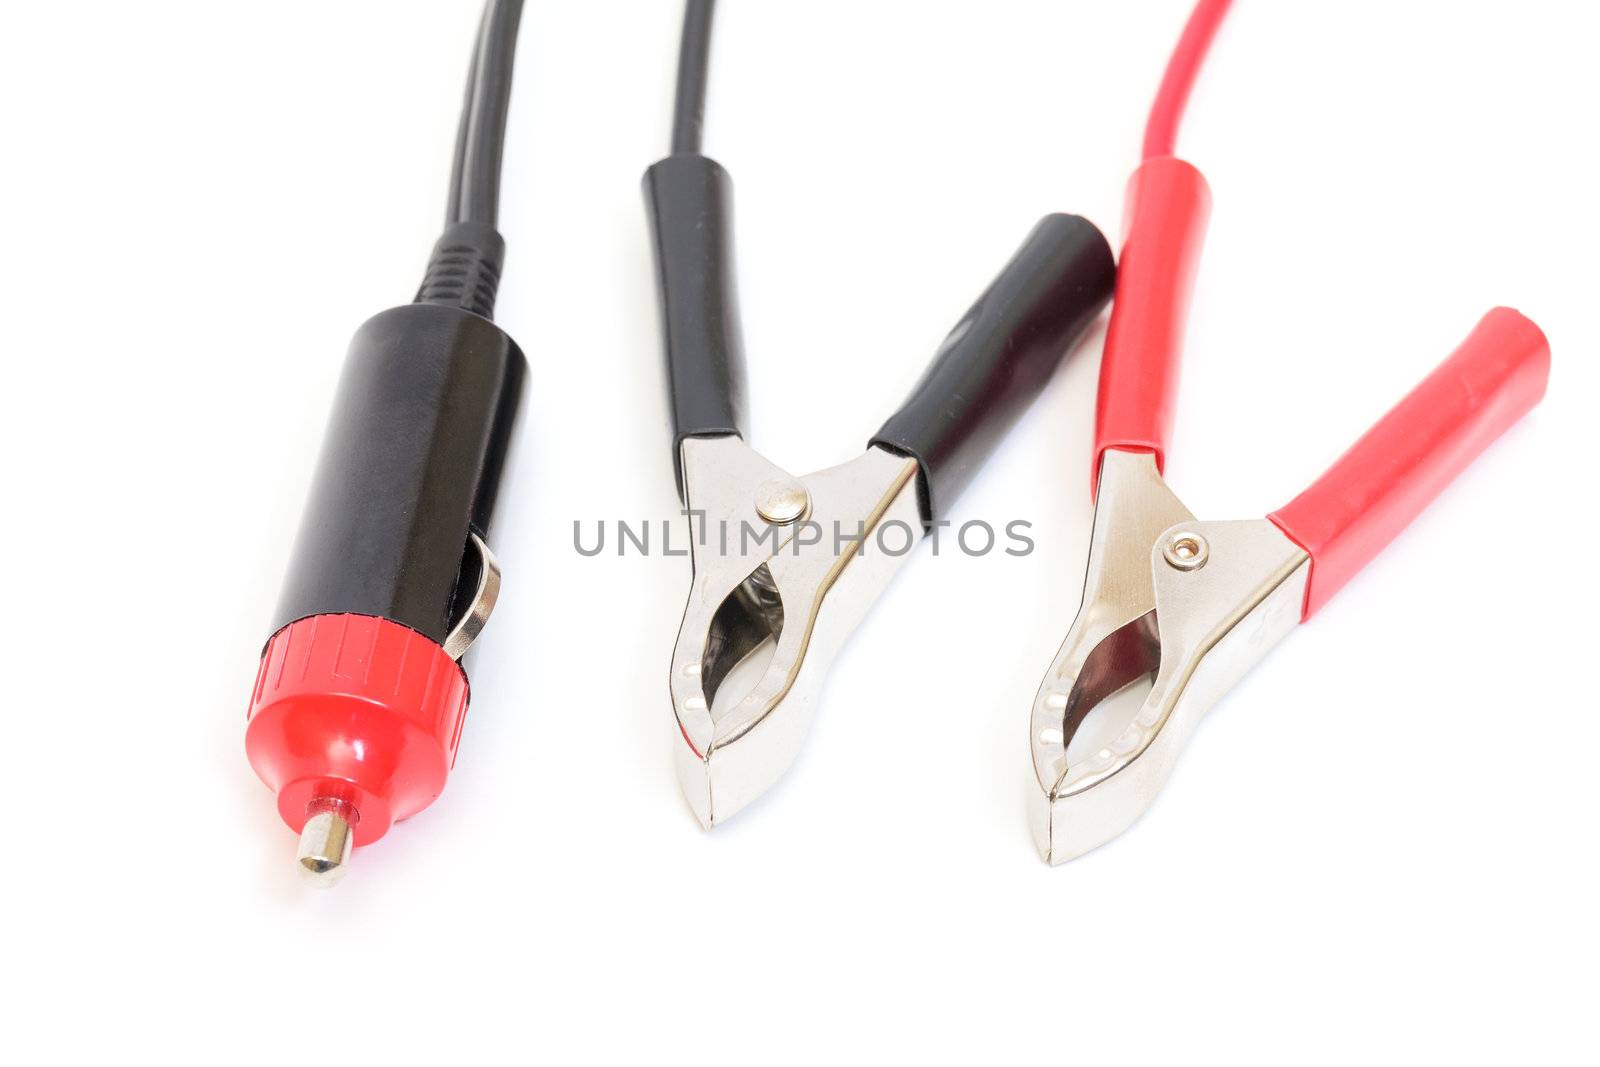 Battery Clamps and Car Charger plug on a white background